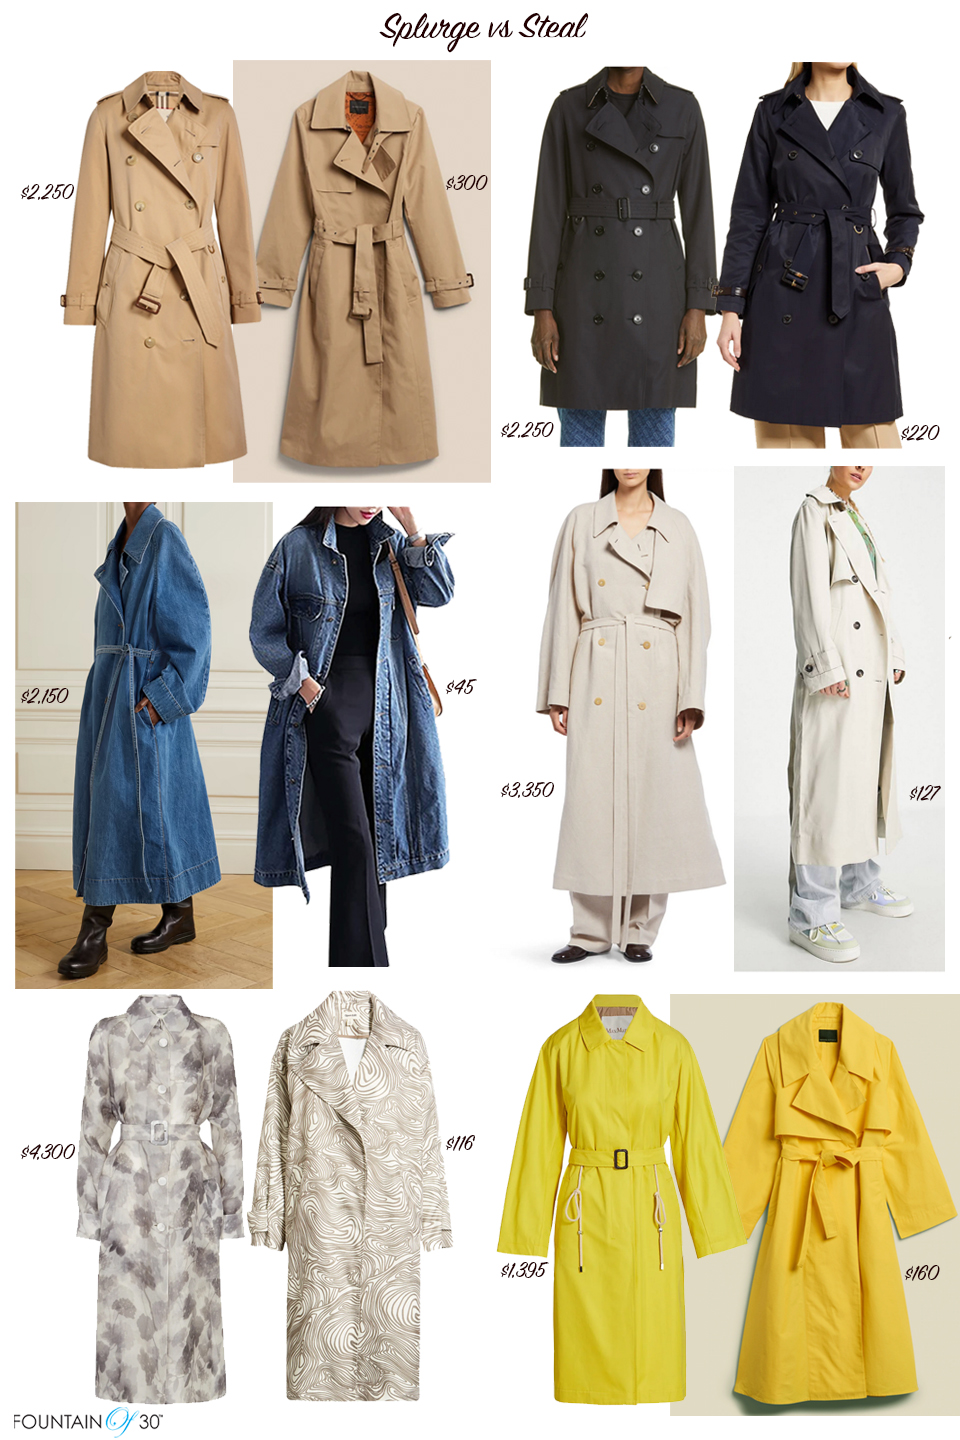 trench coats splurge or steal fountainof30